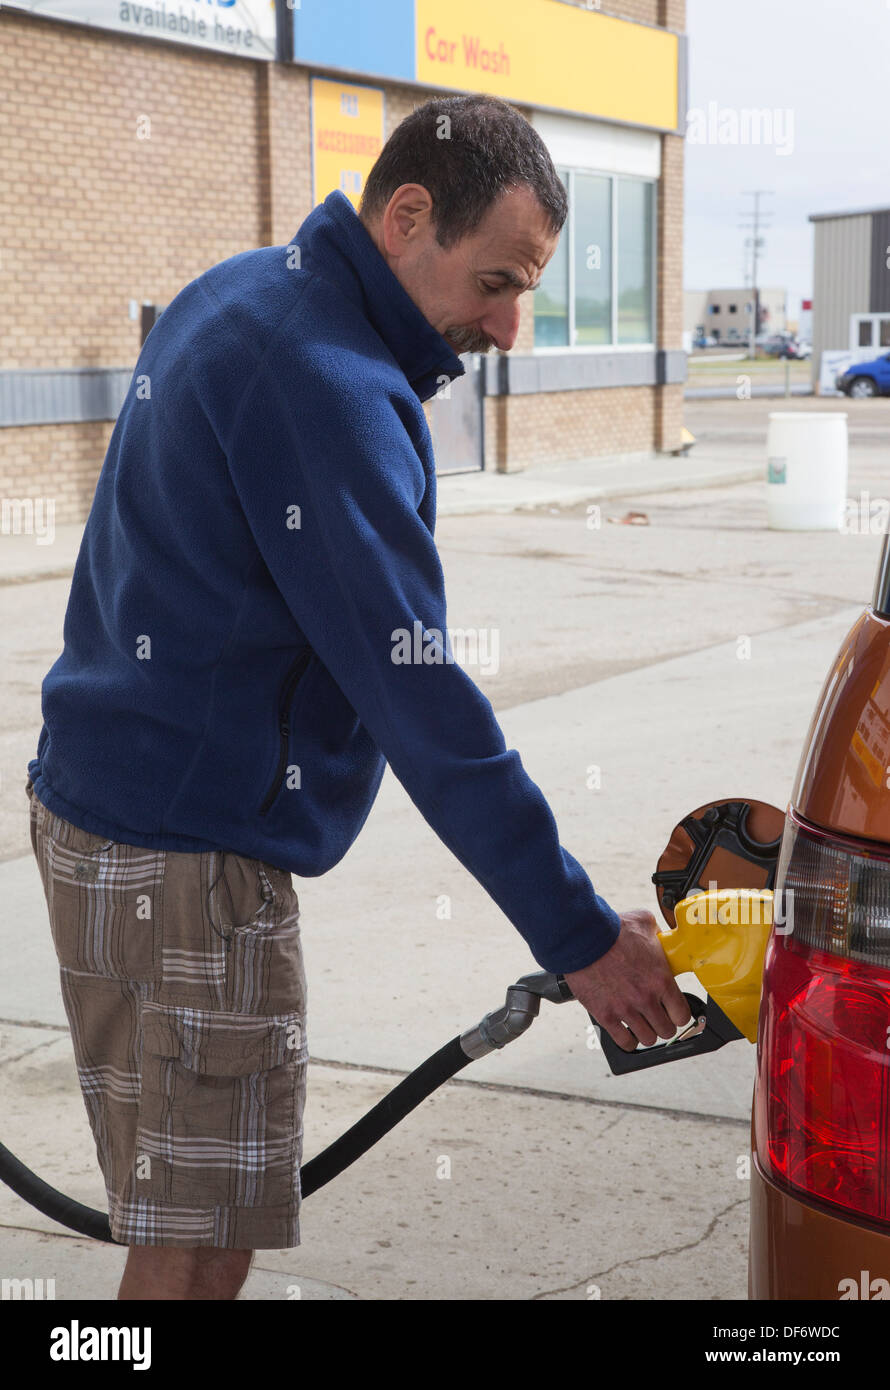 Man pumping gas into his vehicle at service station Stock Photo